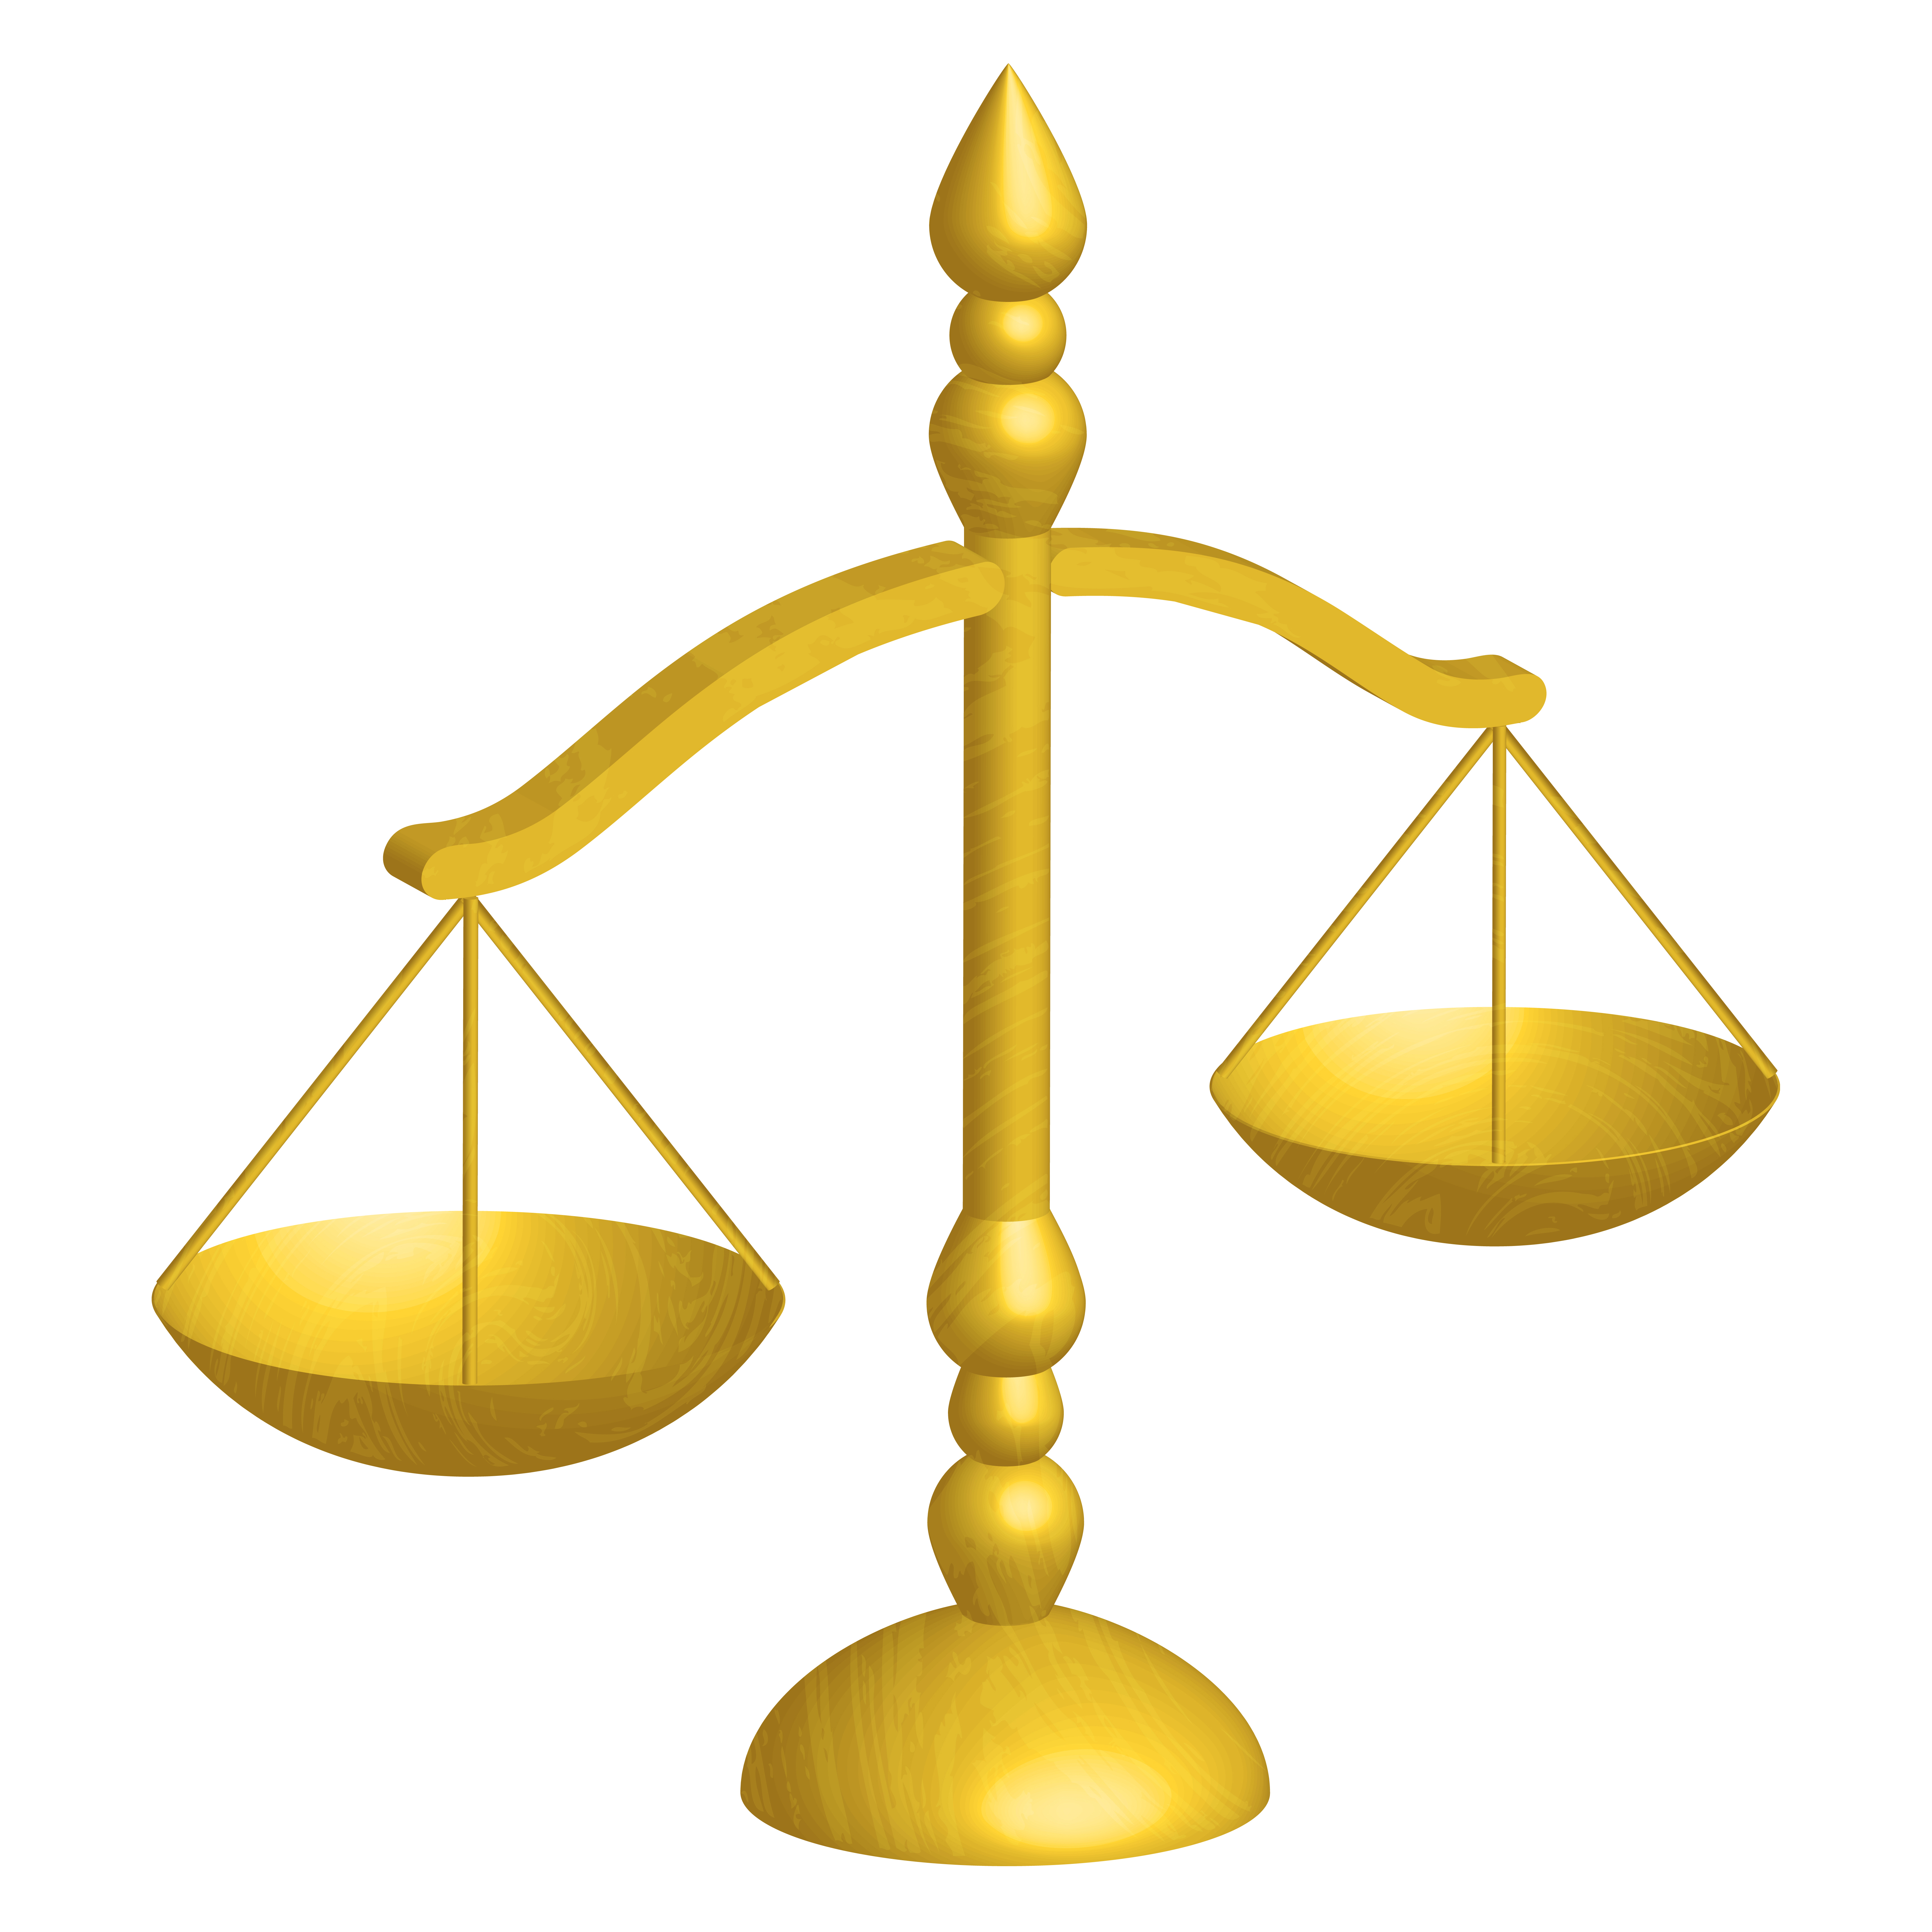 Balancing Scale Clipart - ClipArt Best